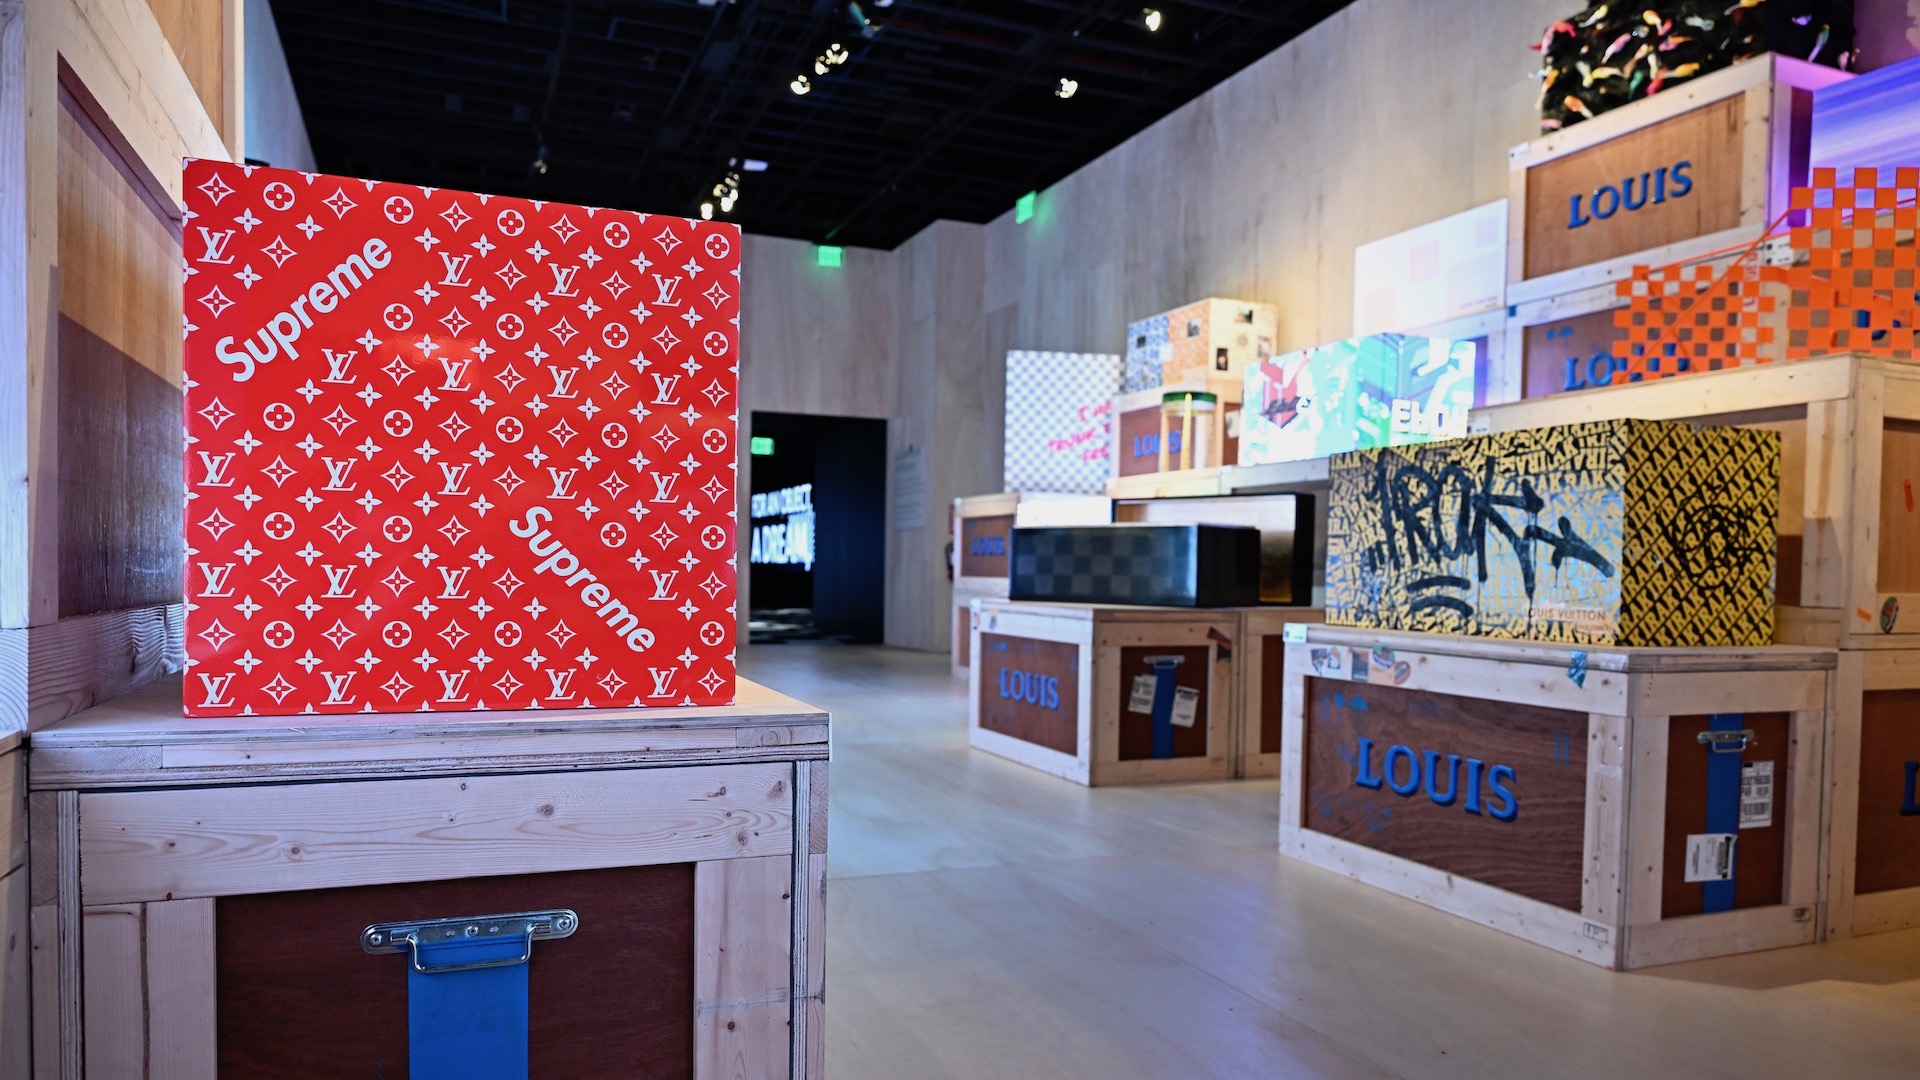 Louis Vuitton 200 Trunks, 200 Visionaries: The Exhibition in Singapore